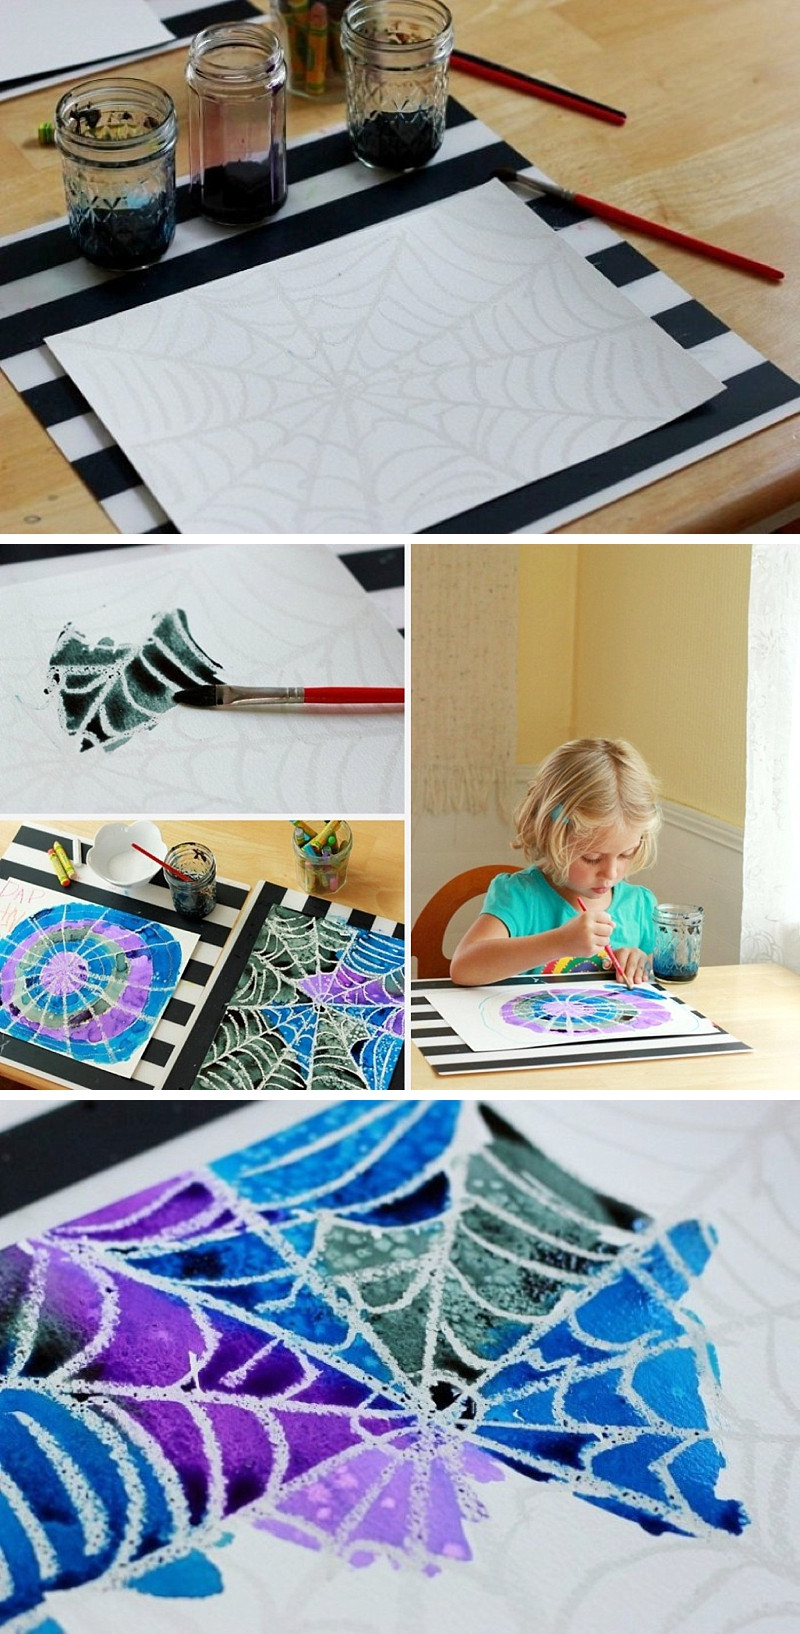 Toddler Art And Craft Ideas
 Spider Web Art Project A Simple and Beautiful